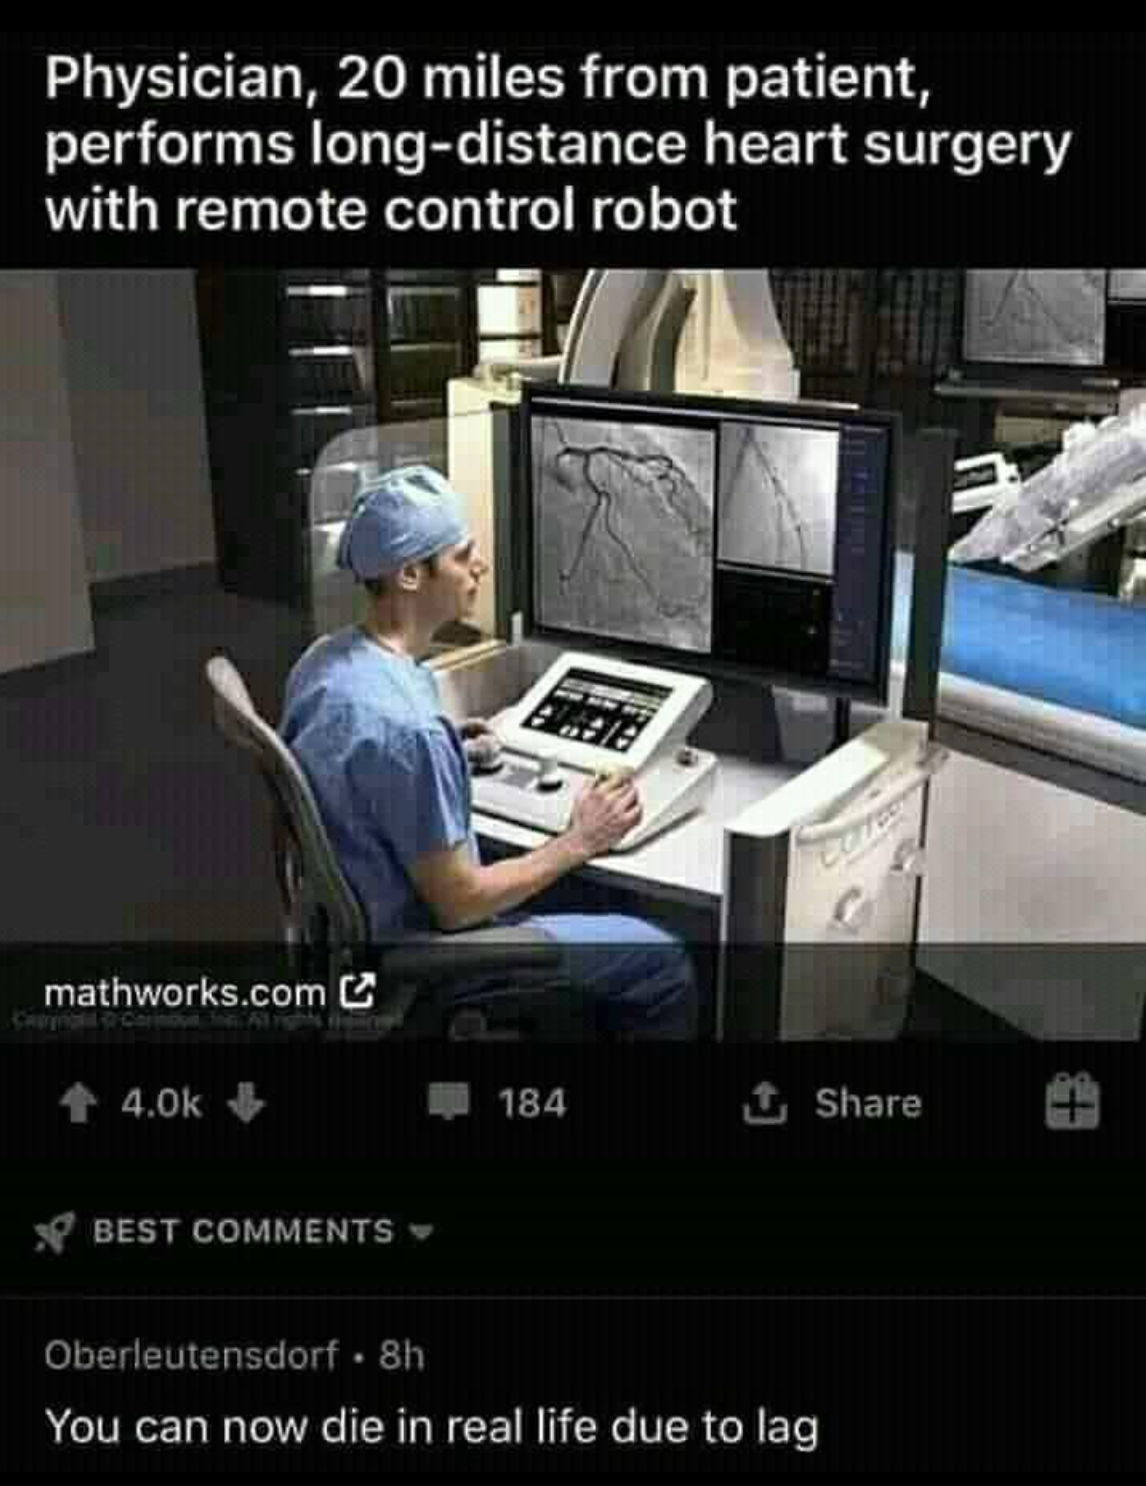 doodle mouse memes - Physician, 20 miles from patient, performs longdistance heart surgery with remote control robot mathworks.com 184 Best Oberleutensdorf. 8h You can now die in real life due to lag